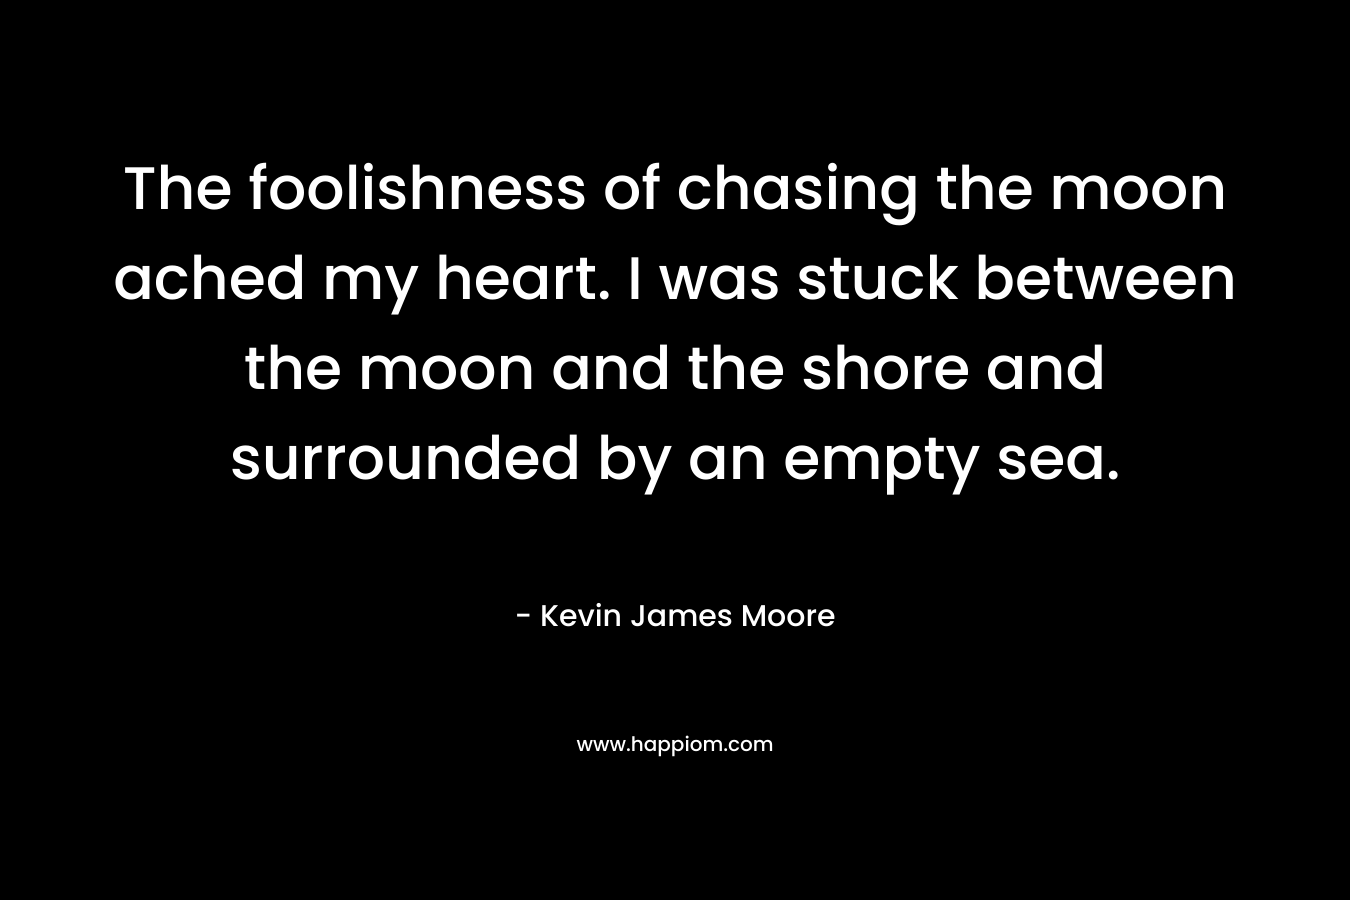 The foolishness of chasing the moon ached my heart. I was stuck between the moon and the shore and surrounded by an empty sea. – Kevin James Moore